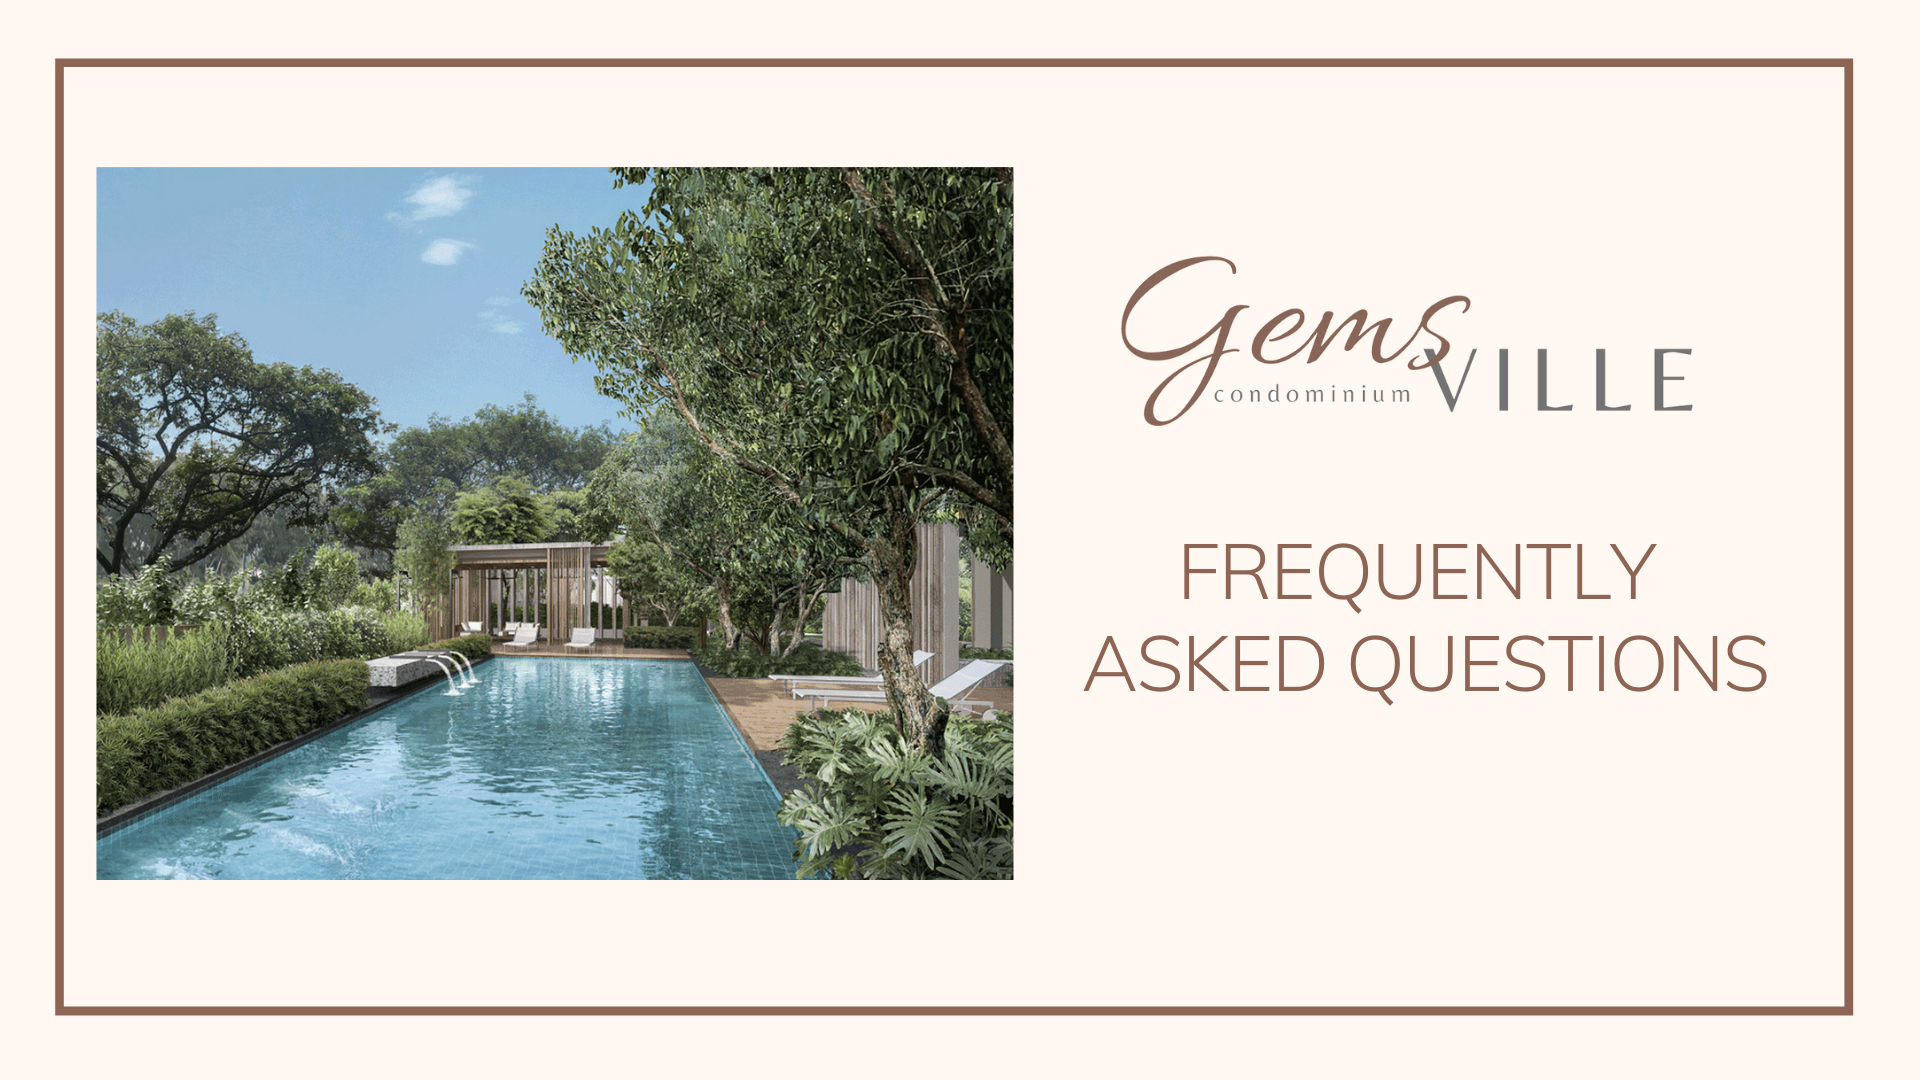 List of FAQs about Gems Ville Condo